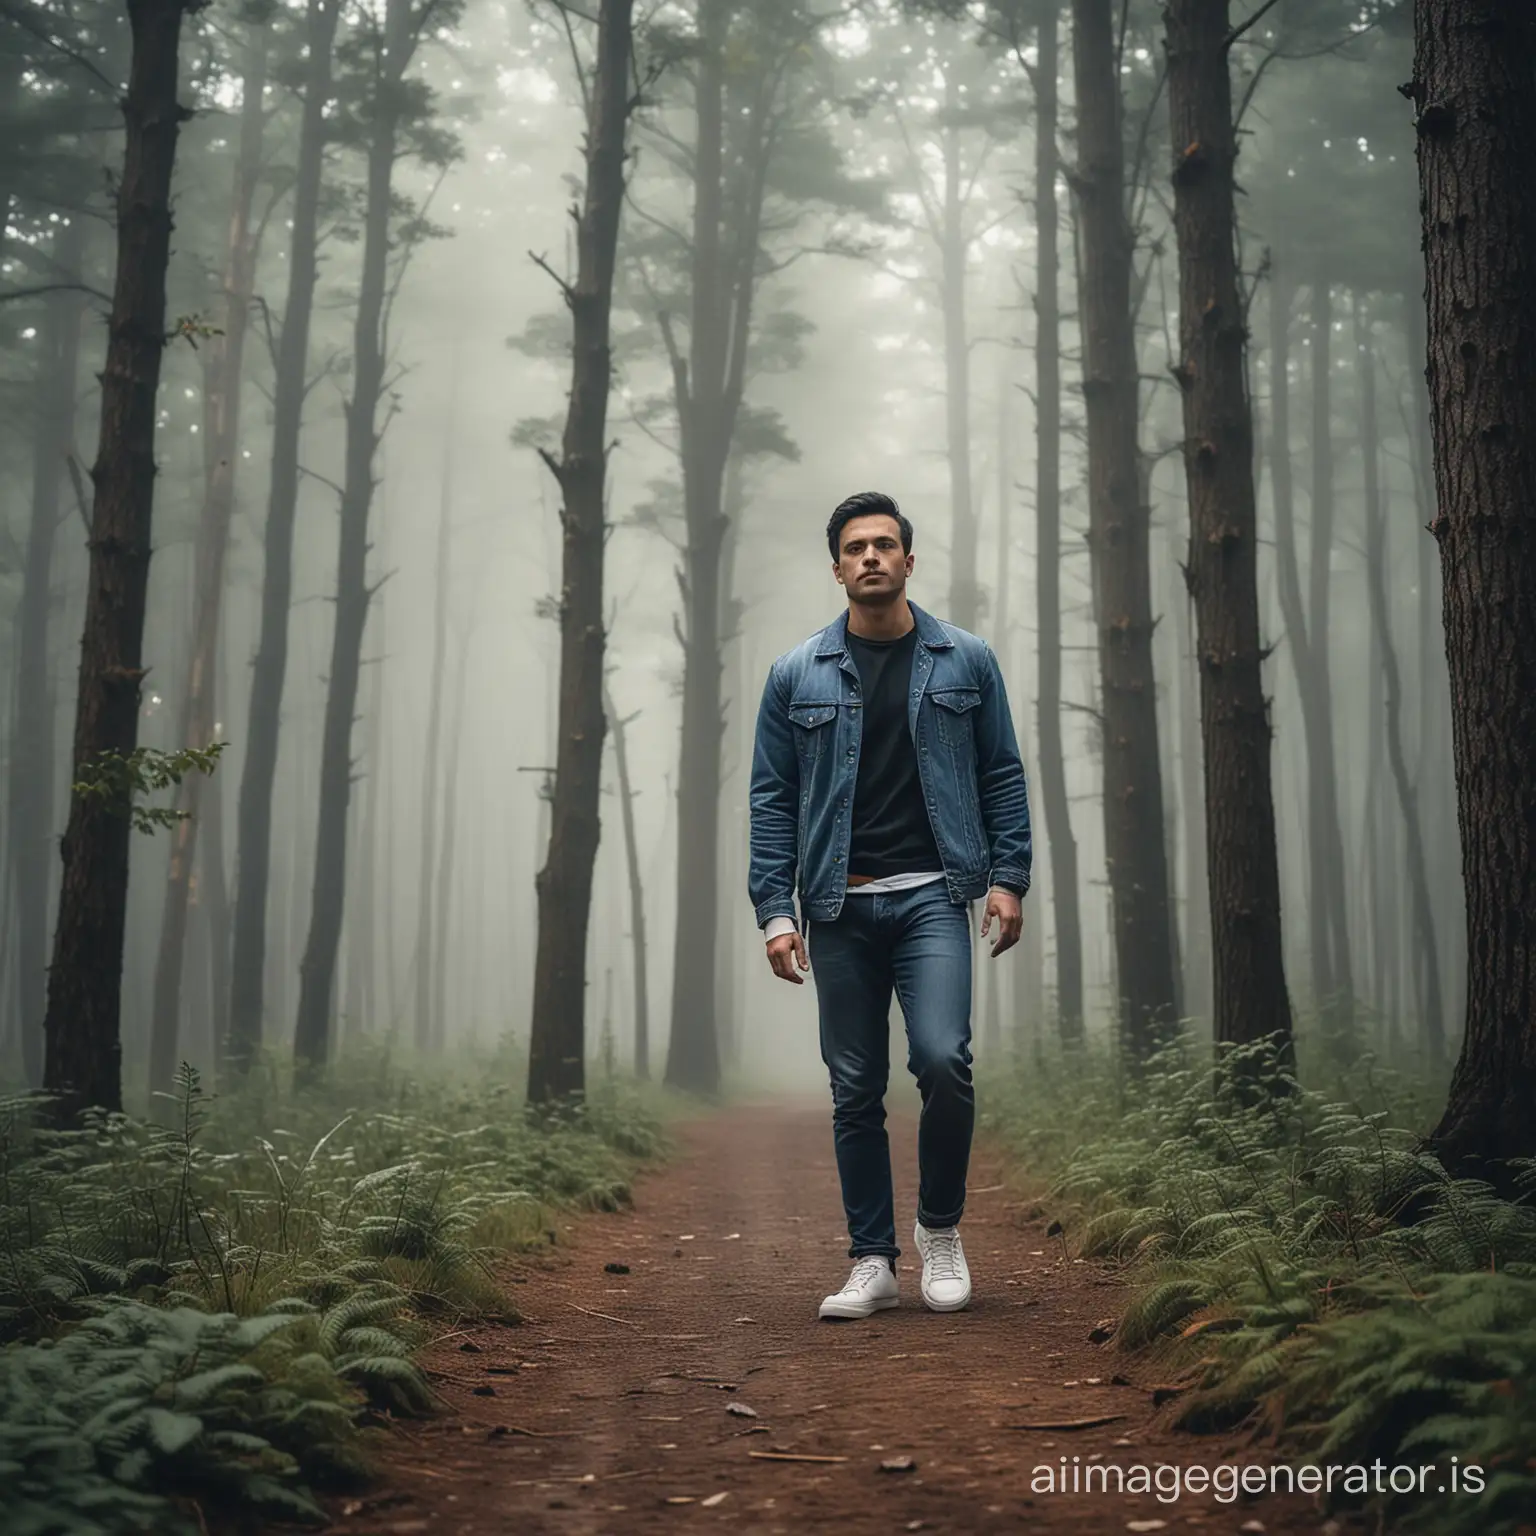 full body shoot, wide shoot, cinematic portrait of handsome 30 years old man, 70 kg weight,  with very short cut black hair, wearing denim jeans and white sneakers Tommy Hilfiger shoes, walking in misty forest, tall tree, lonely handsome man, wearing a Tommy Hilfiger crewneck, artistic portrait, calm and quiet atmosphere, bokeh background showing a misty forest, high and detail camera, handsome pose, looked up at the sky